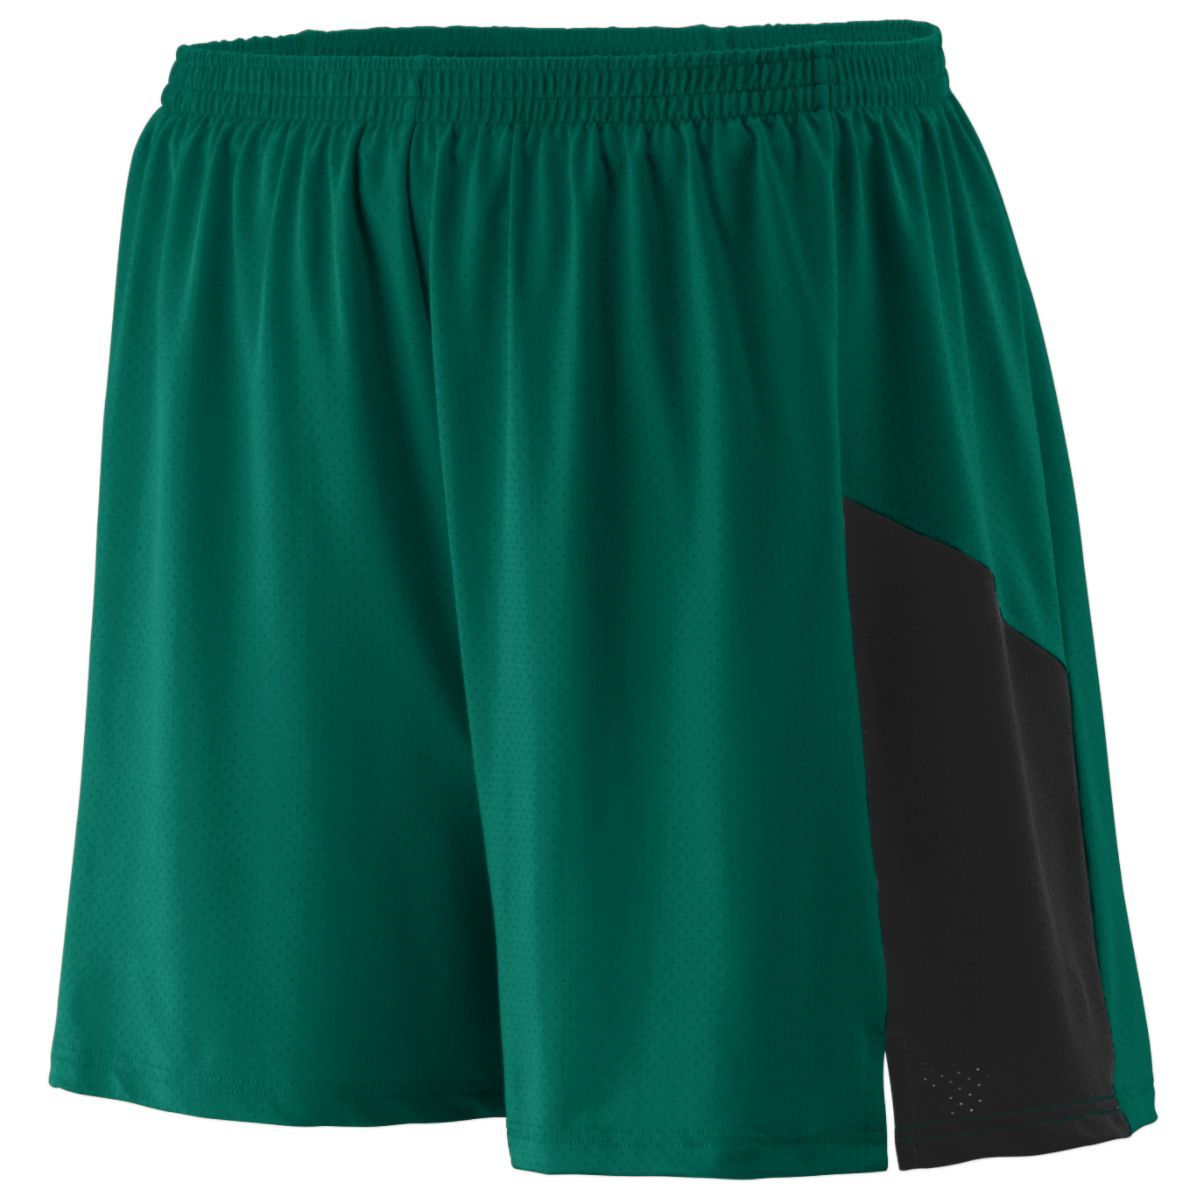 Augusta Sportswear Sprint Shorts in Dark Green/Black  -Part of the Adult, Adult-Shorts, Augusta-Products, Track-Field product lines at KanaleyCreations.com